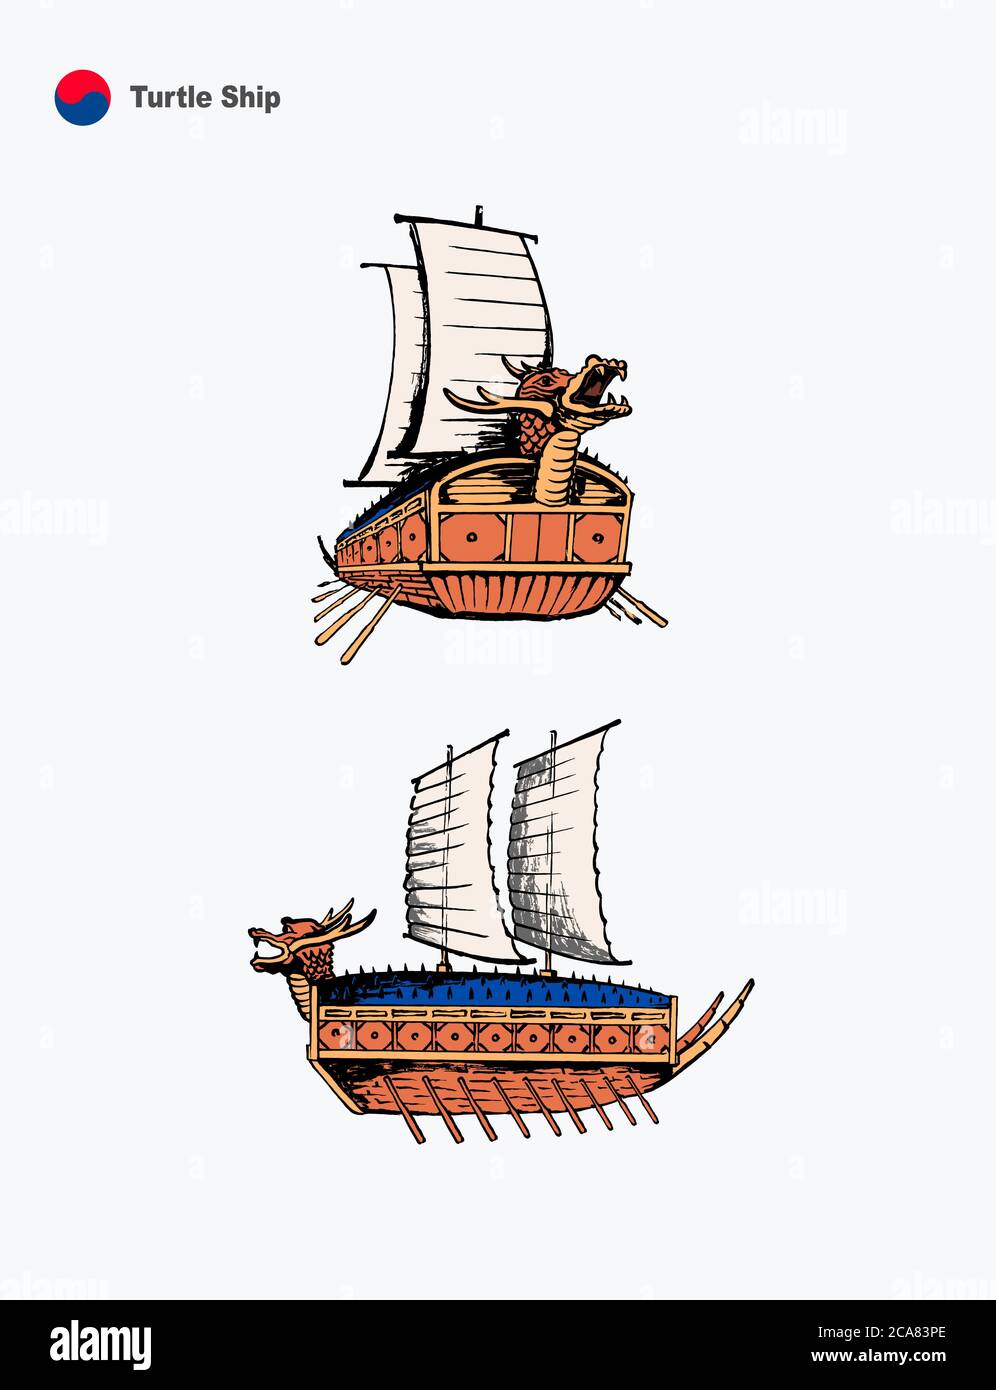 Korean turtle ship, turtle-shaped ship with front and sides, vector illustration. Stock Vector